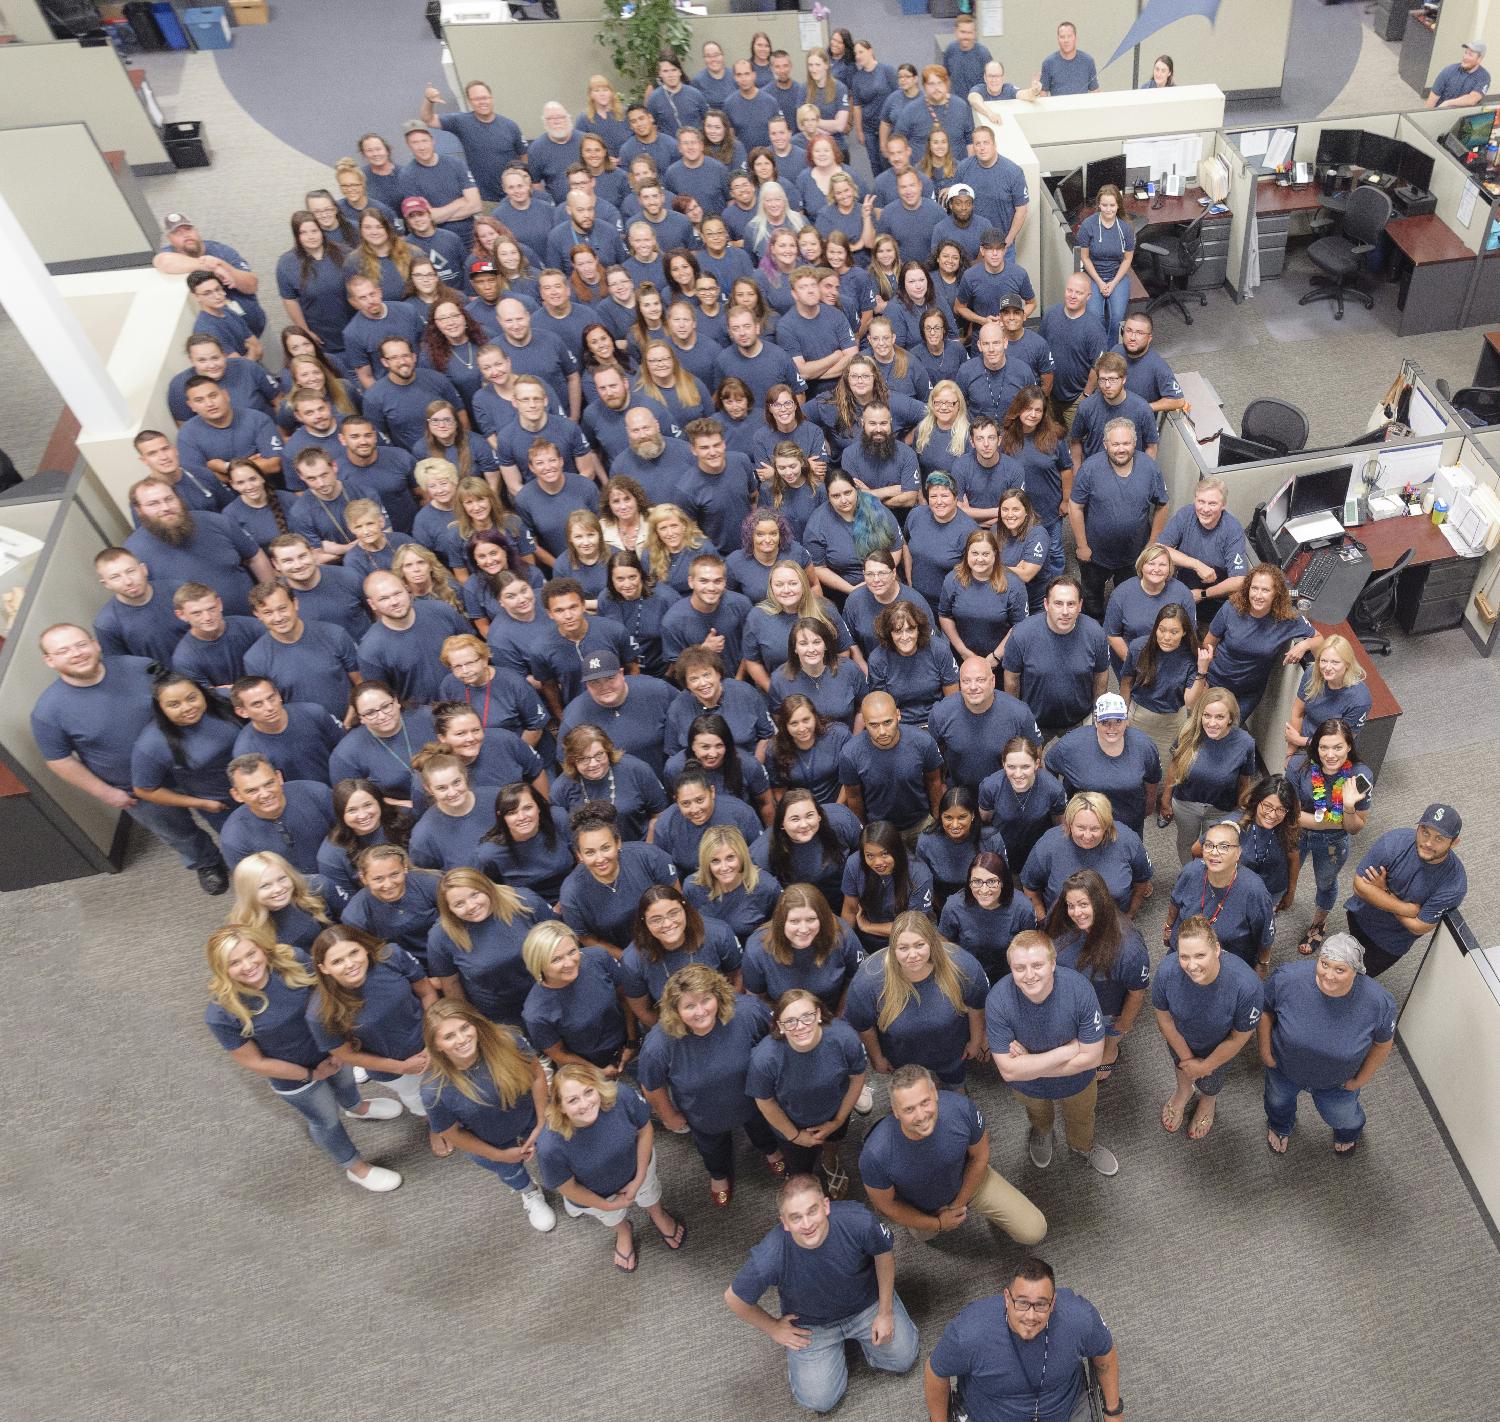 Corporate employees show of PRMI pride by wearing matching company shirts during spirit week.